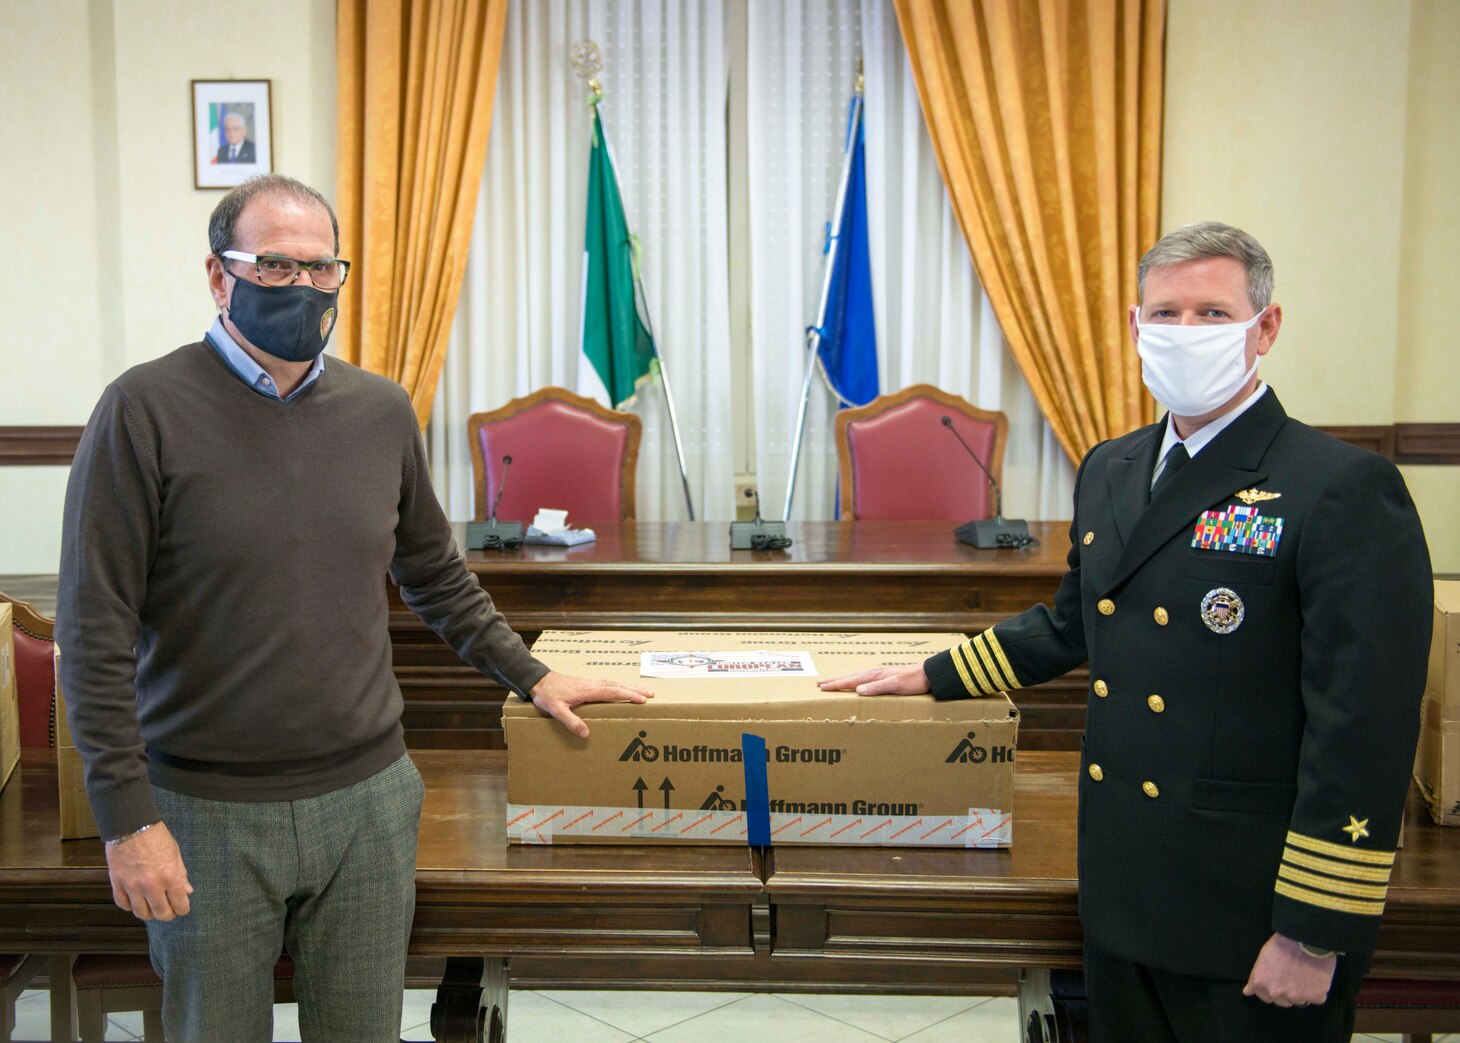 Capt. David Pollard, Commanding officer of the Blue Ridge-class command and control ship USS Mount Whitney, and Cosmo Mitrano, mayor of Gaeta, Italy, pose for a photo during a medical supplies donation to Gaeta, Italy on behalf of the USS Mount Whitney (LCC 20) in Gaeta, March 26, 2021.